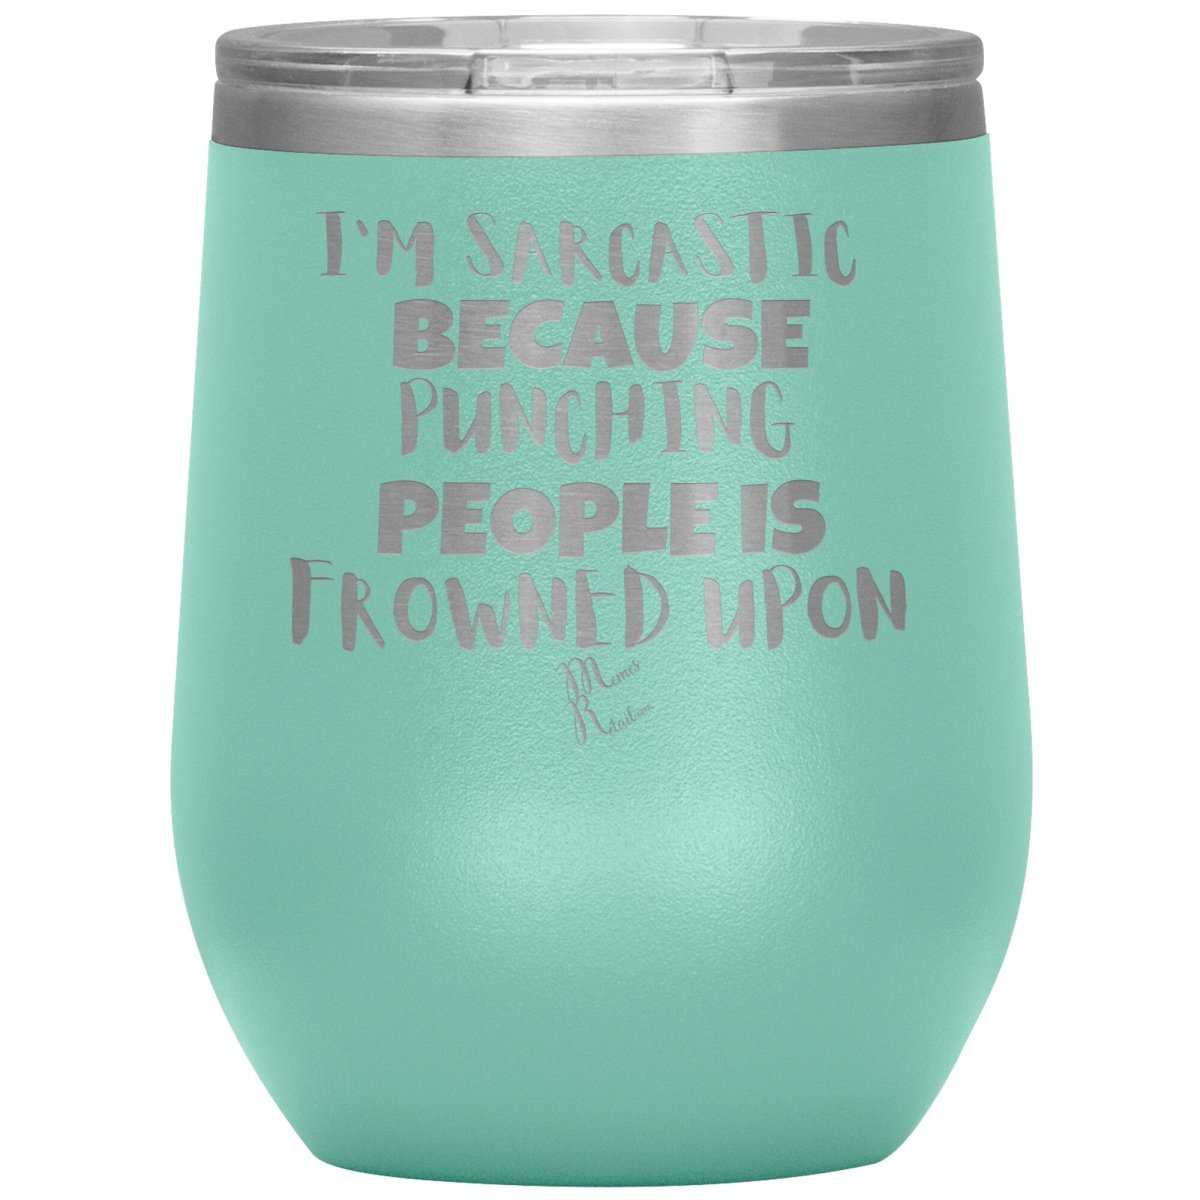 I'm Sarcastic Because Punching People is Frowned Upon Tumblers, 12oz Wine Insulated Tumbler / Teal - MemesRetail.com